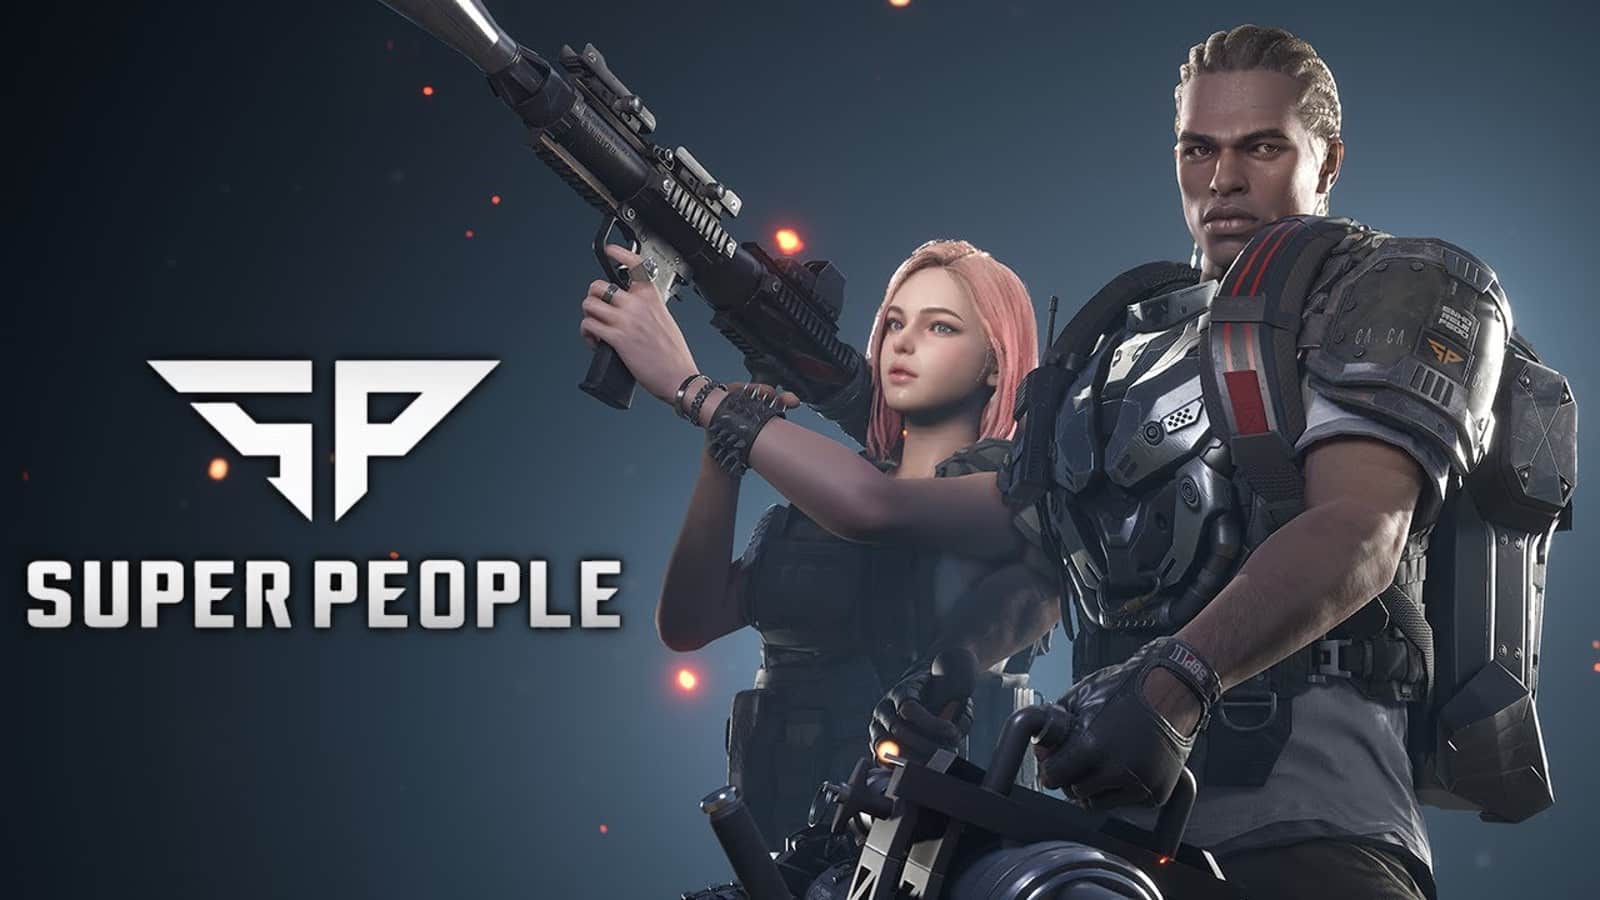 Super People is a high octane battle royale game